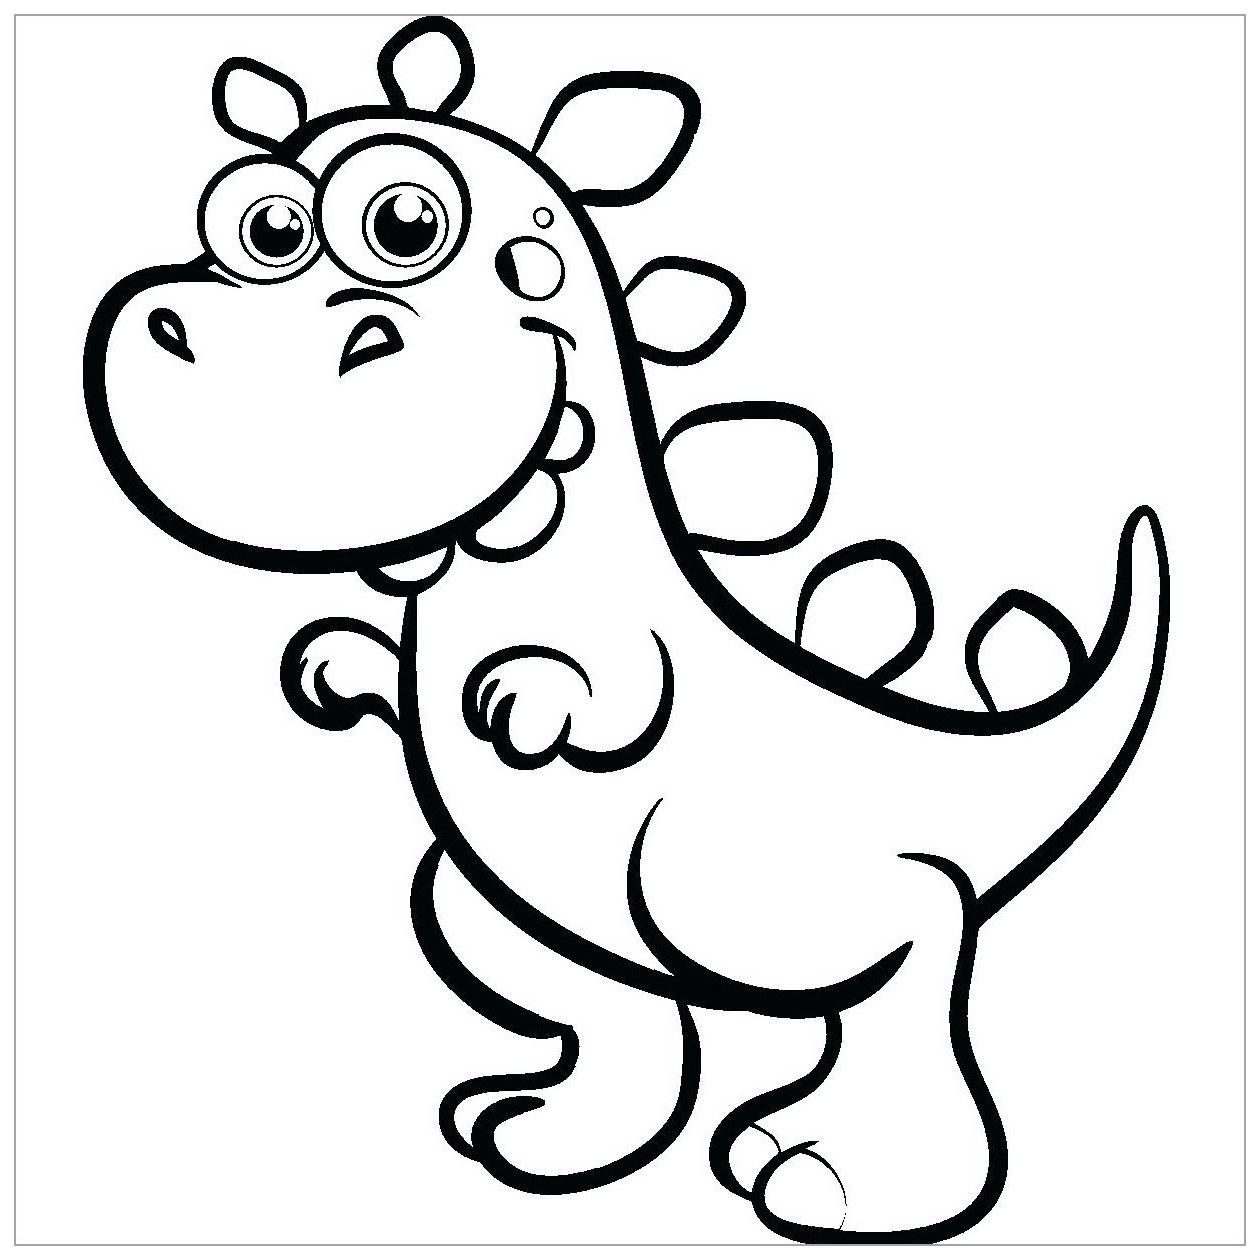 Dinosaurs to download : T Rex cartoon - Dinosaurs Kids Coloring Pages